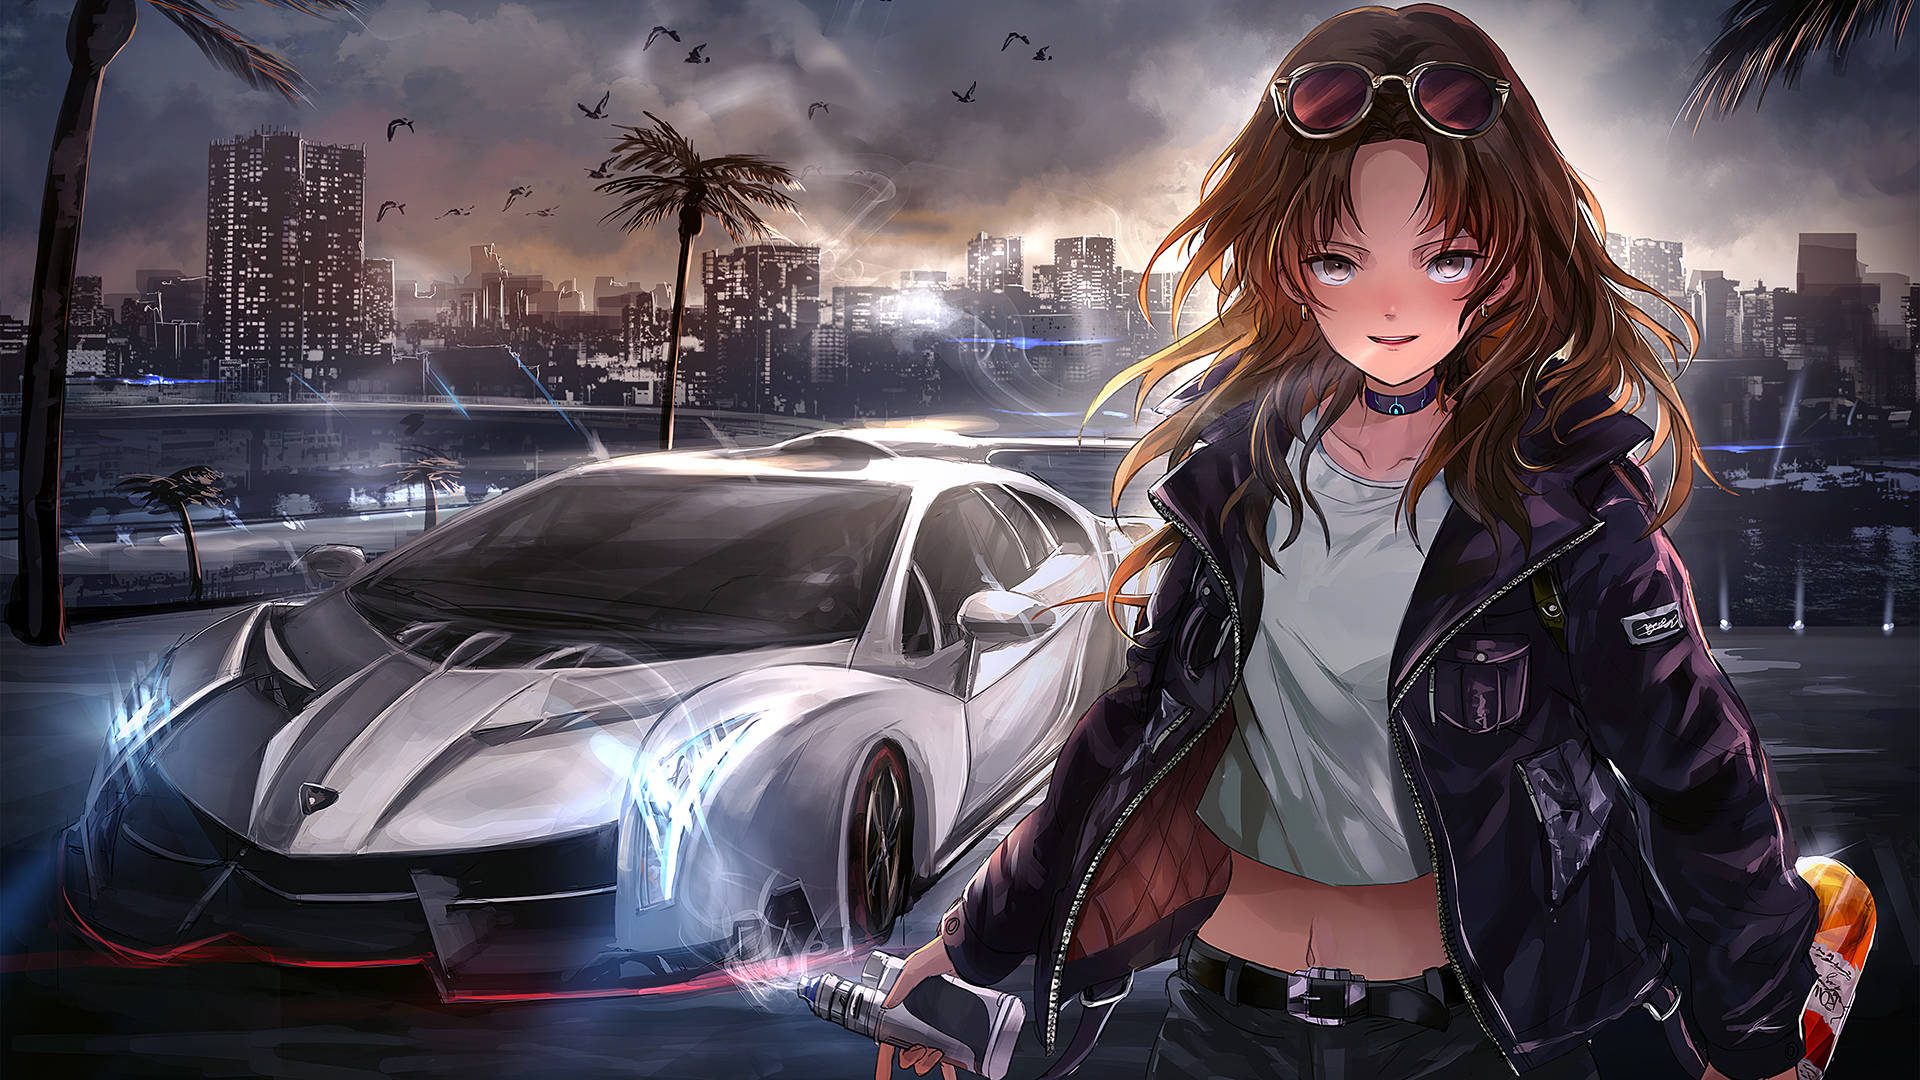 Woman With Sunglasses Next To Car Anime Wallpaper